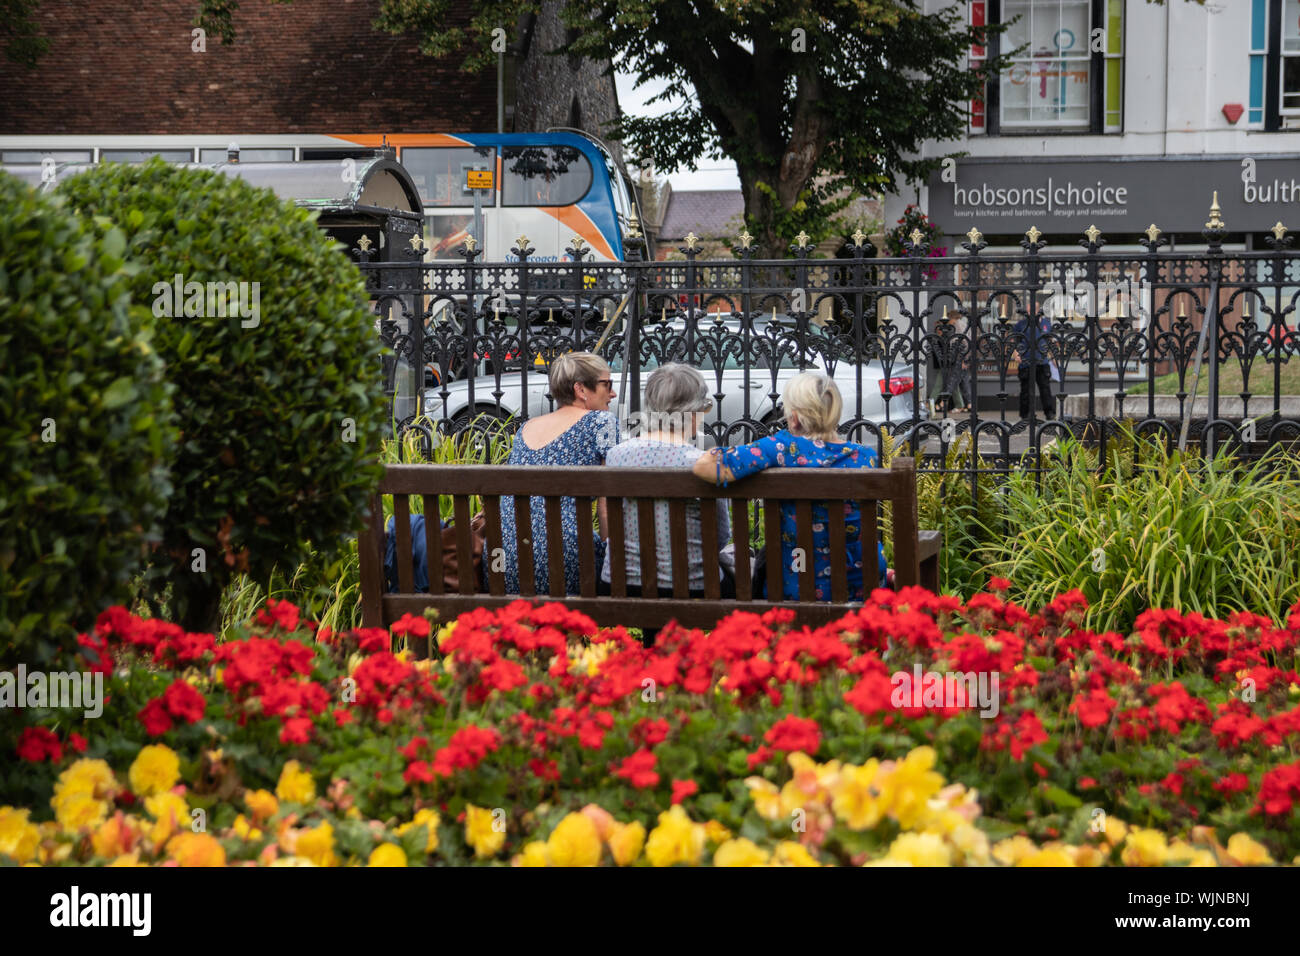 Three middle aged women sat on a wooden bench in the park surrounded by flowers Stock Photo